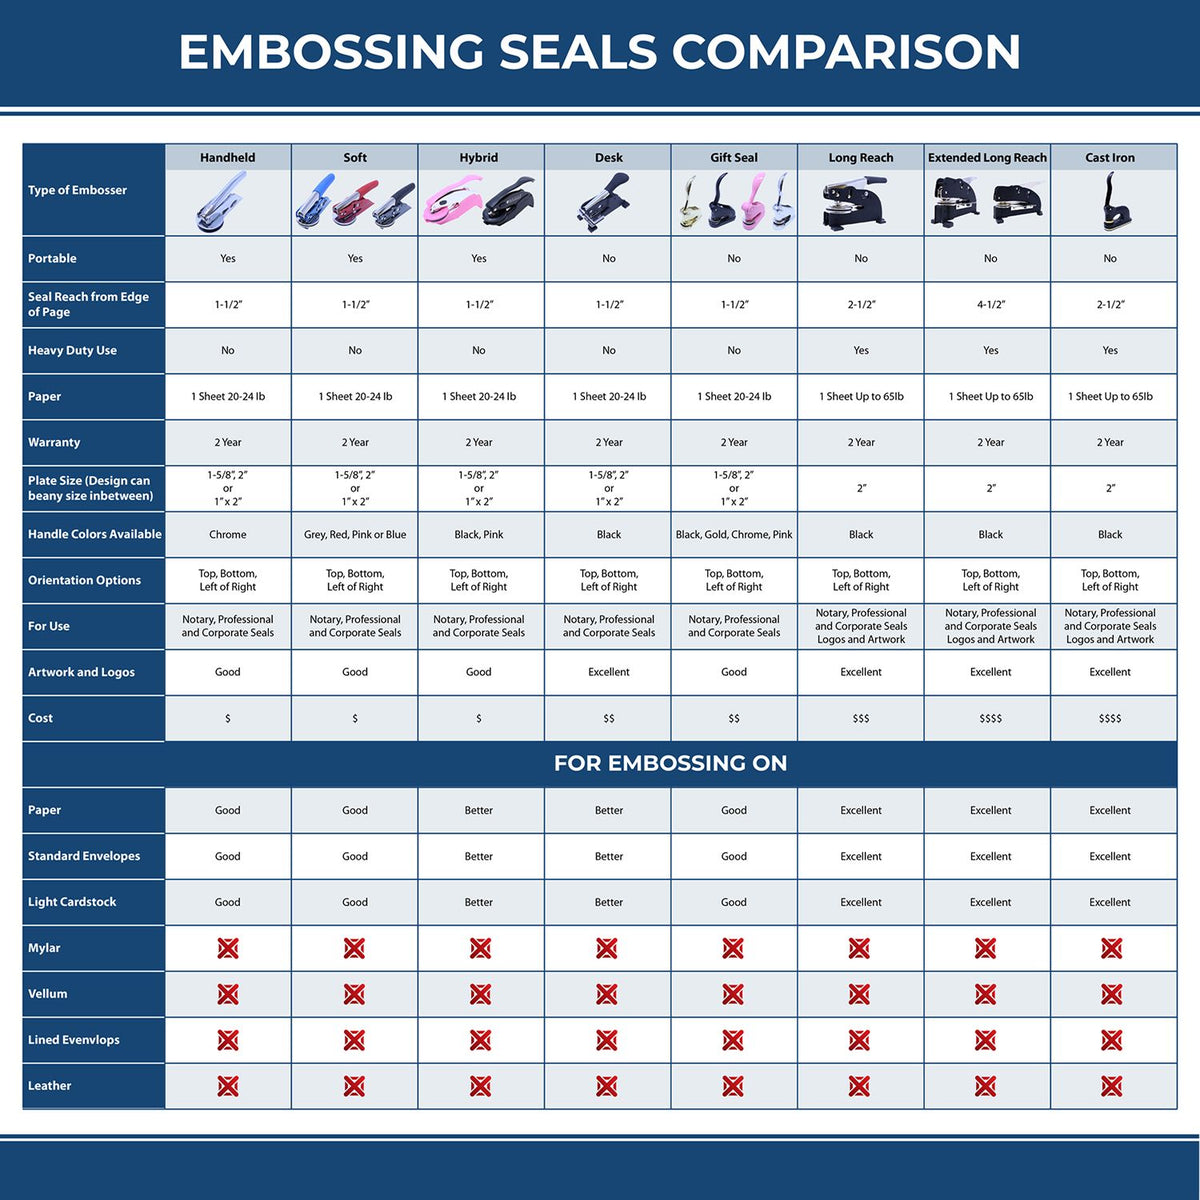 A comparison chart for the different types of mount models available for the State of North Dakota Architectural Seal Embosser.